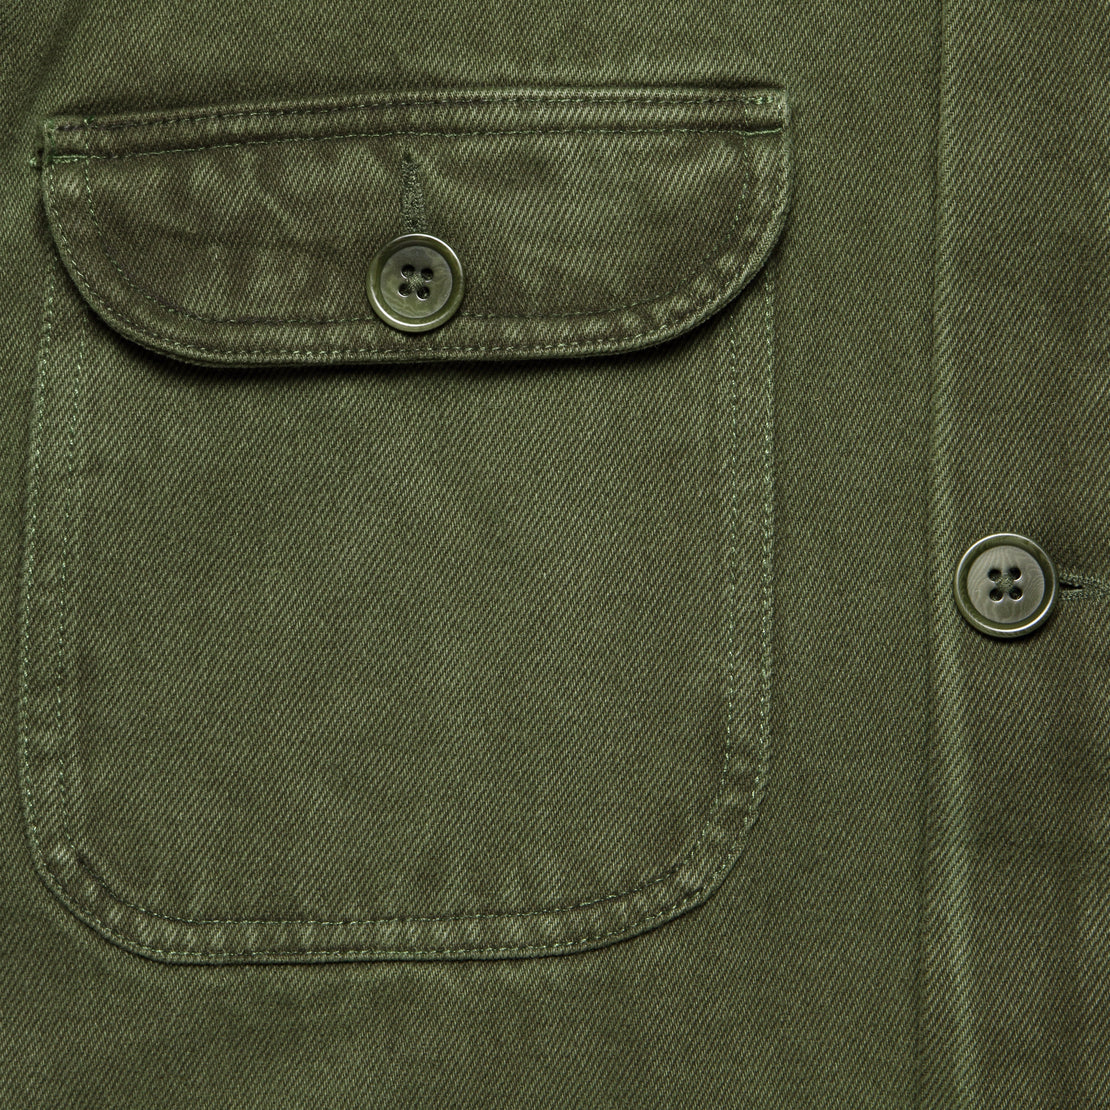 Recycled Denim Work Jacket - Military Olive - Alex Mill - STAG Provisions - Outerwear - Coat / Jacket